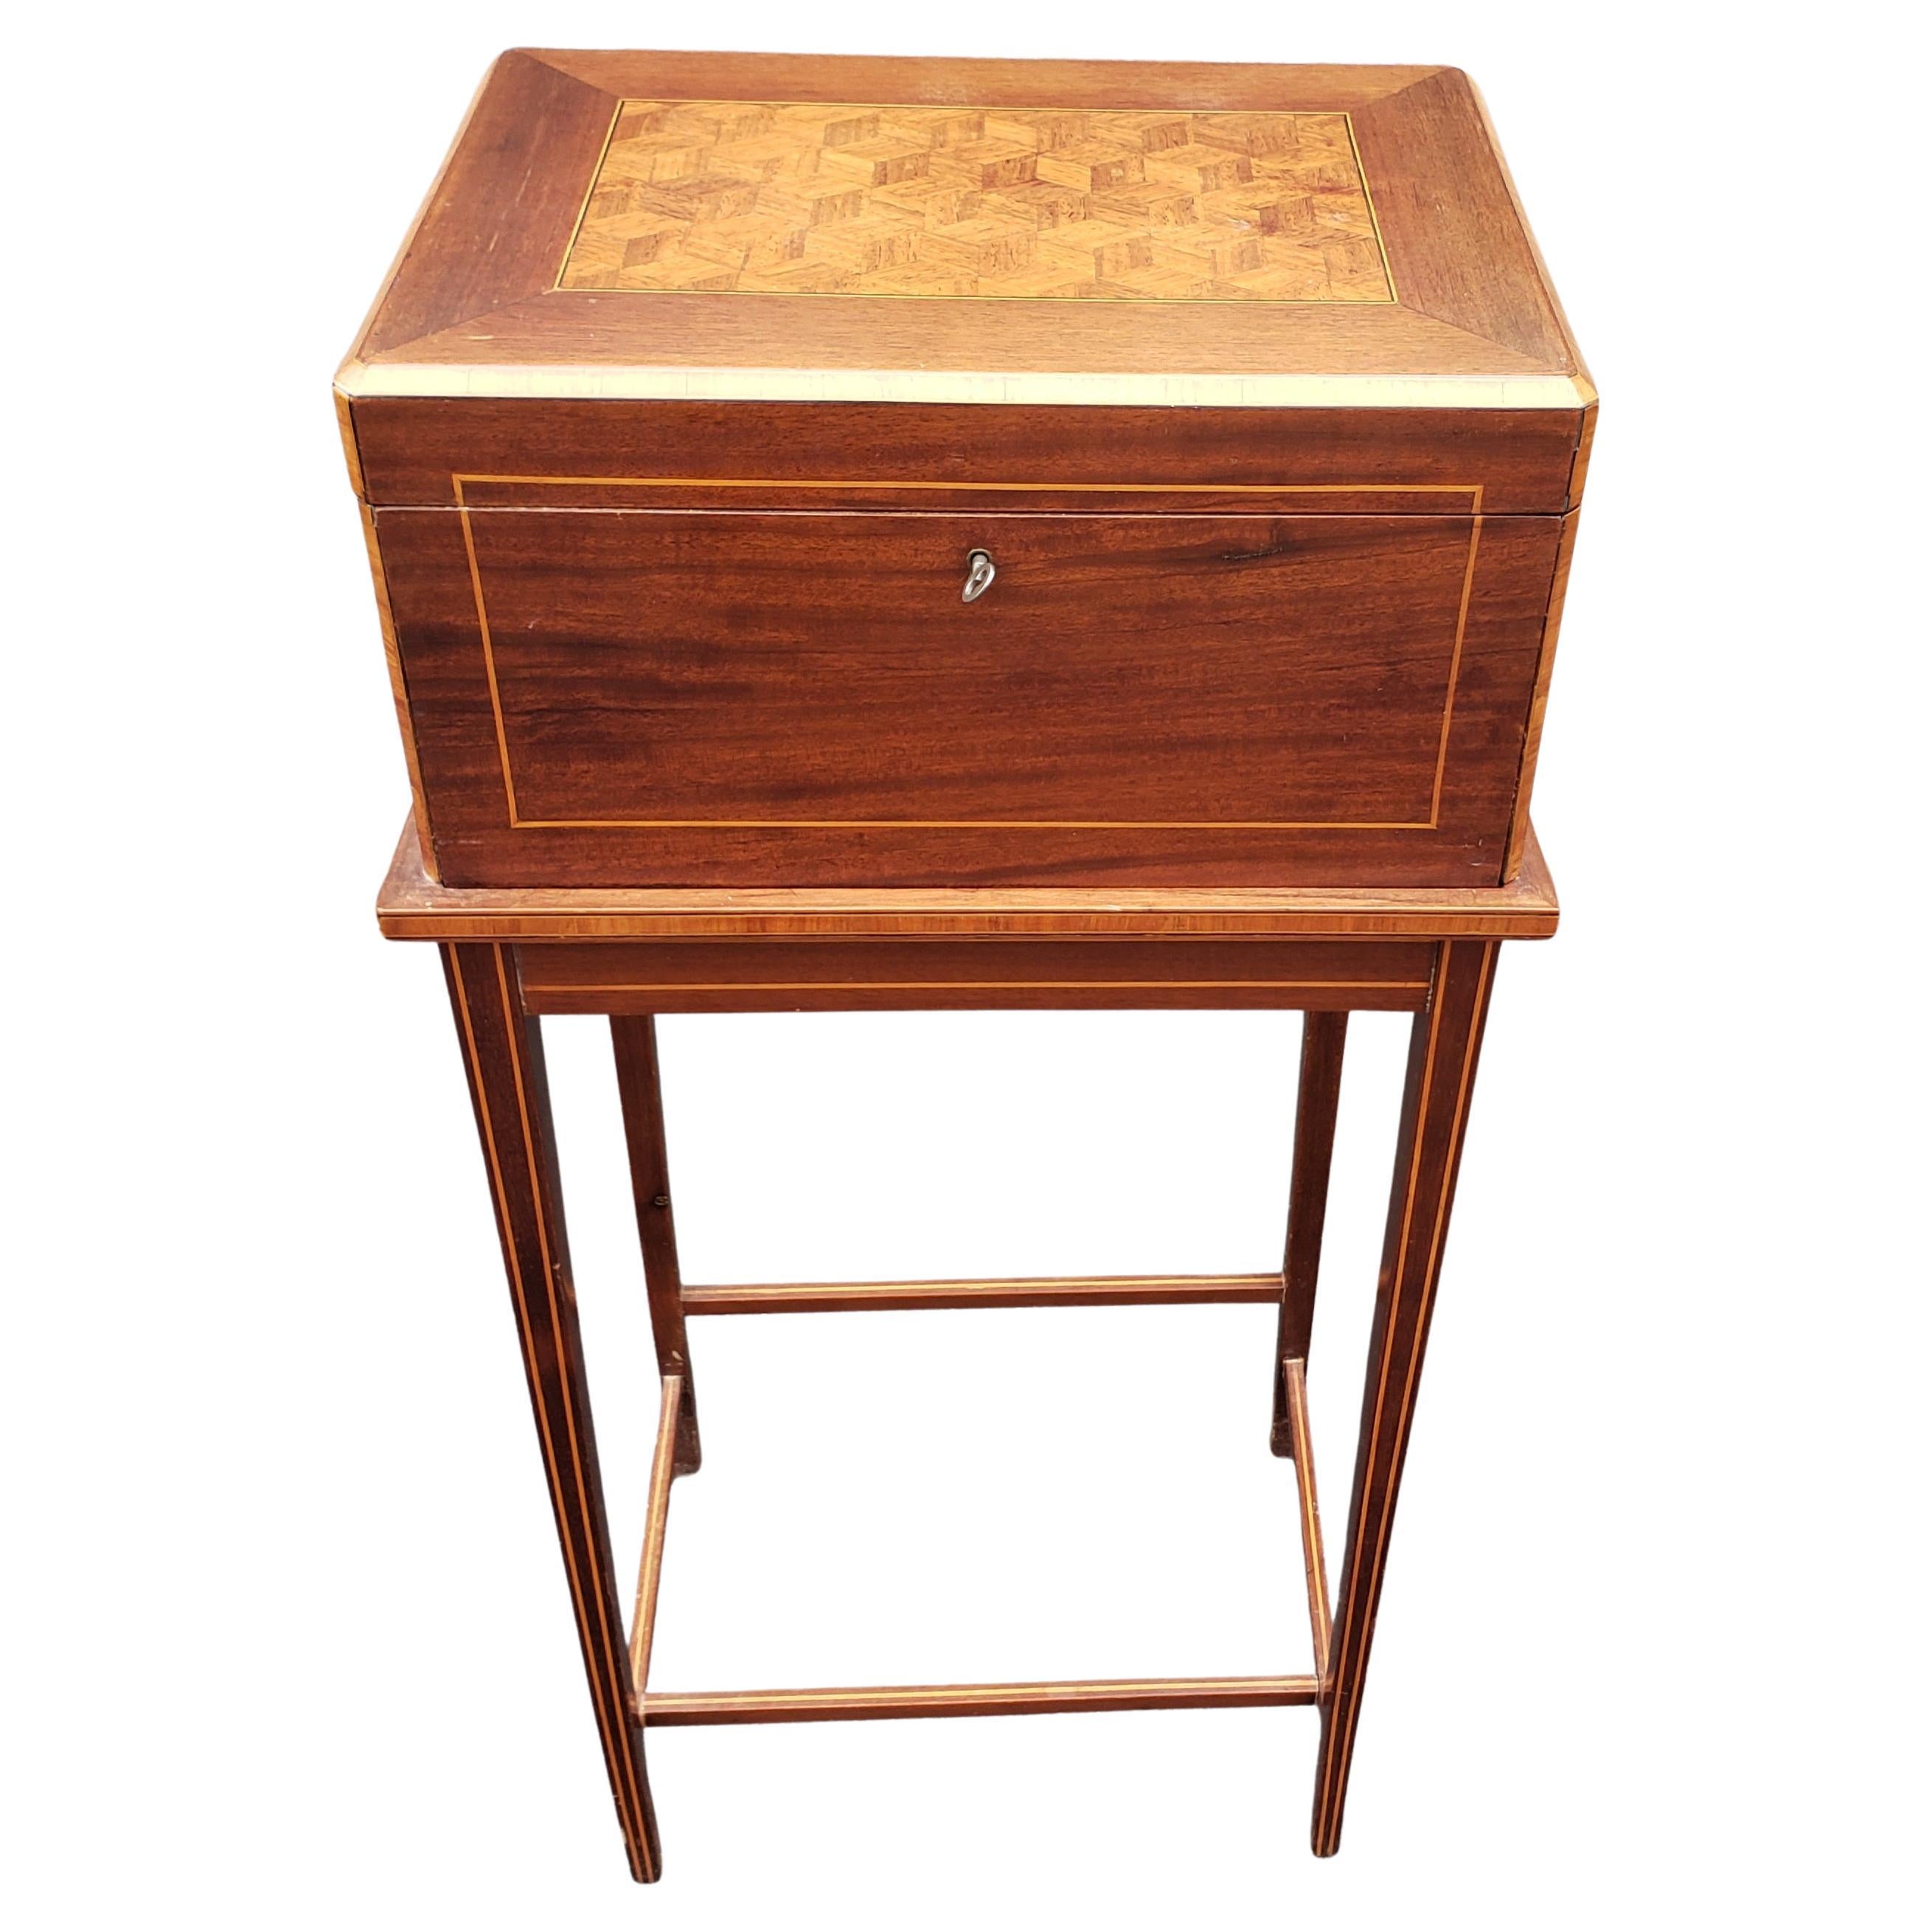 George III Style Satinwood inlays And Parquetry mahogany dresser box on stand with pull out tray and a functional lock in great condition. Features 2 drawers and a top organizing tray, a beveled mirror. Key present.